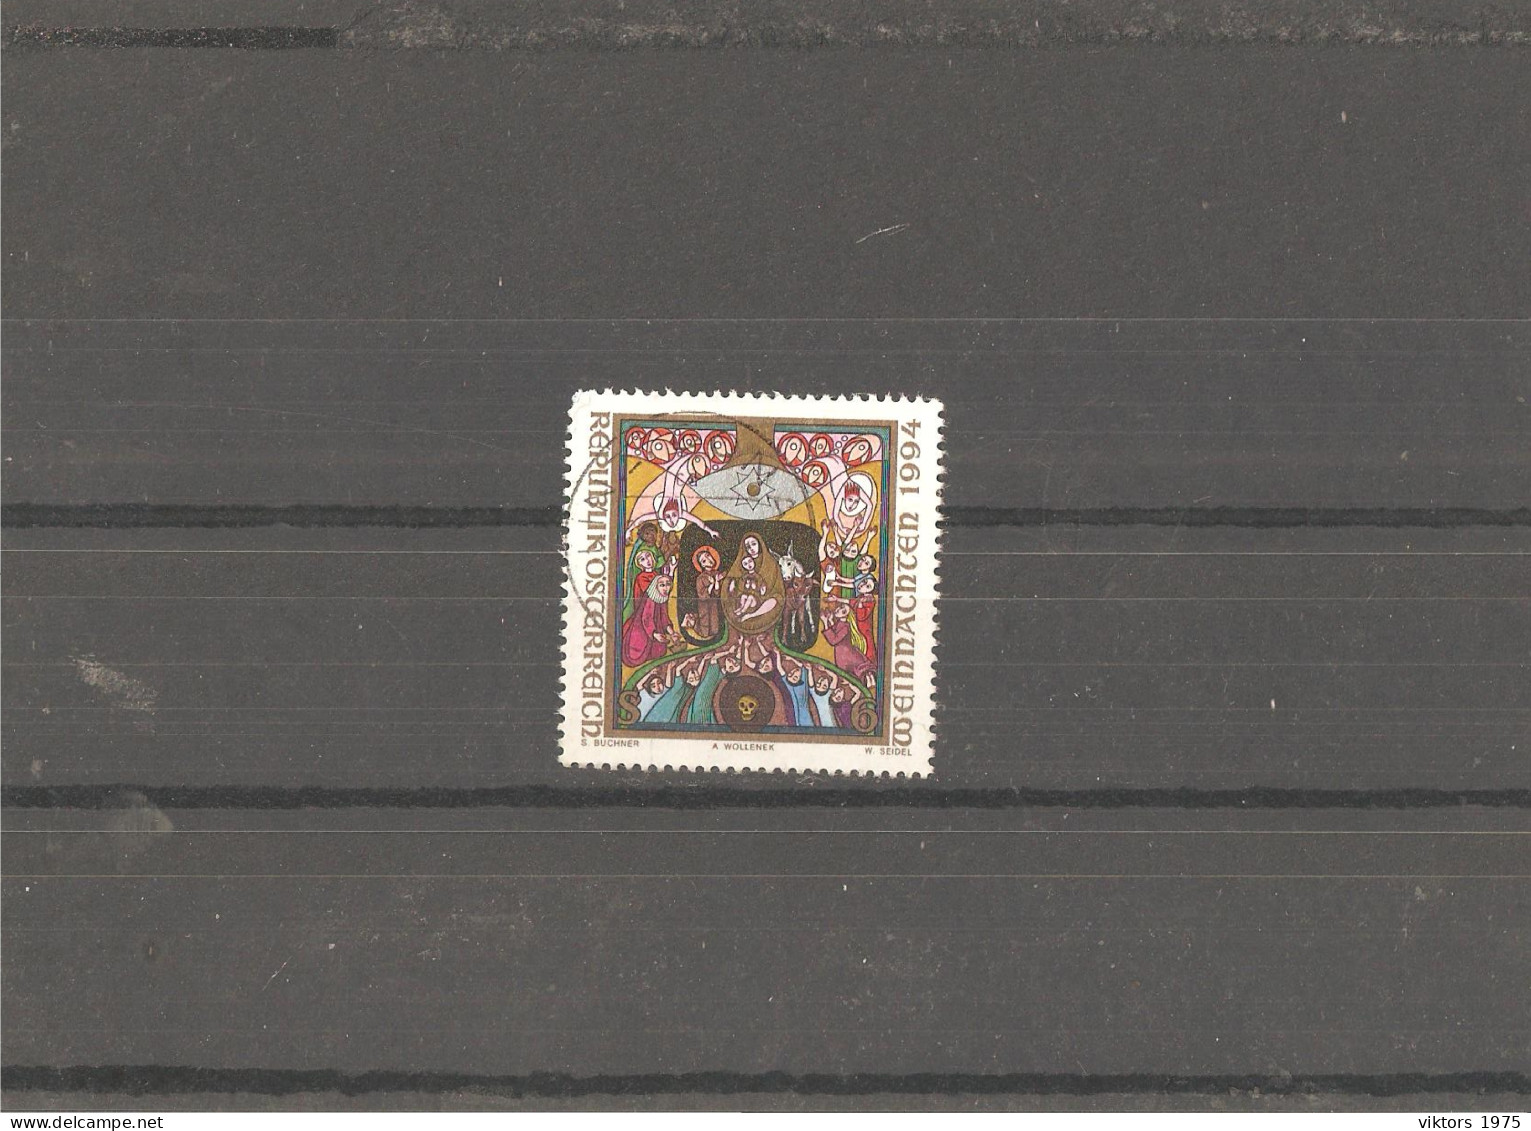 Used Stamp Nr.2144 In MICHEL Catalog - Used Stamps